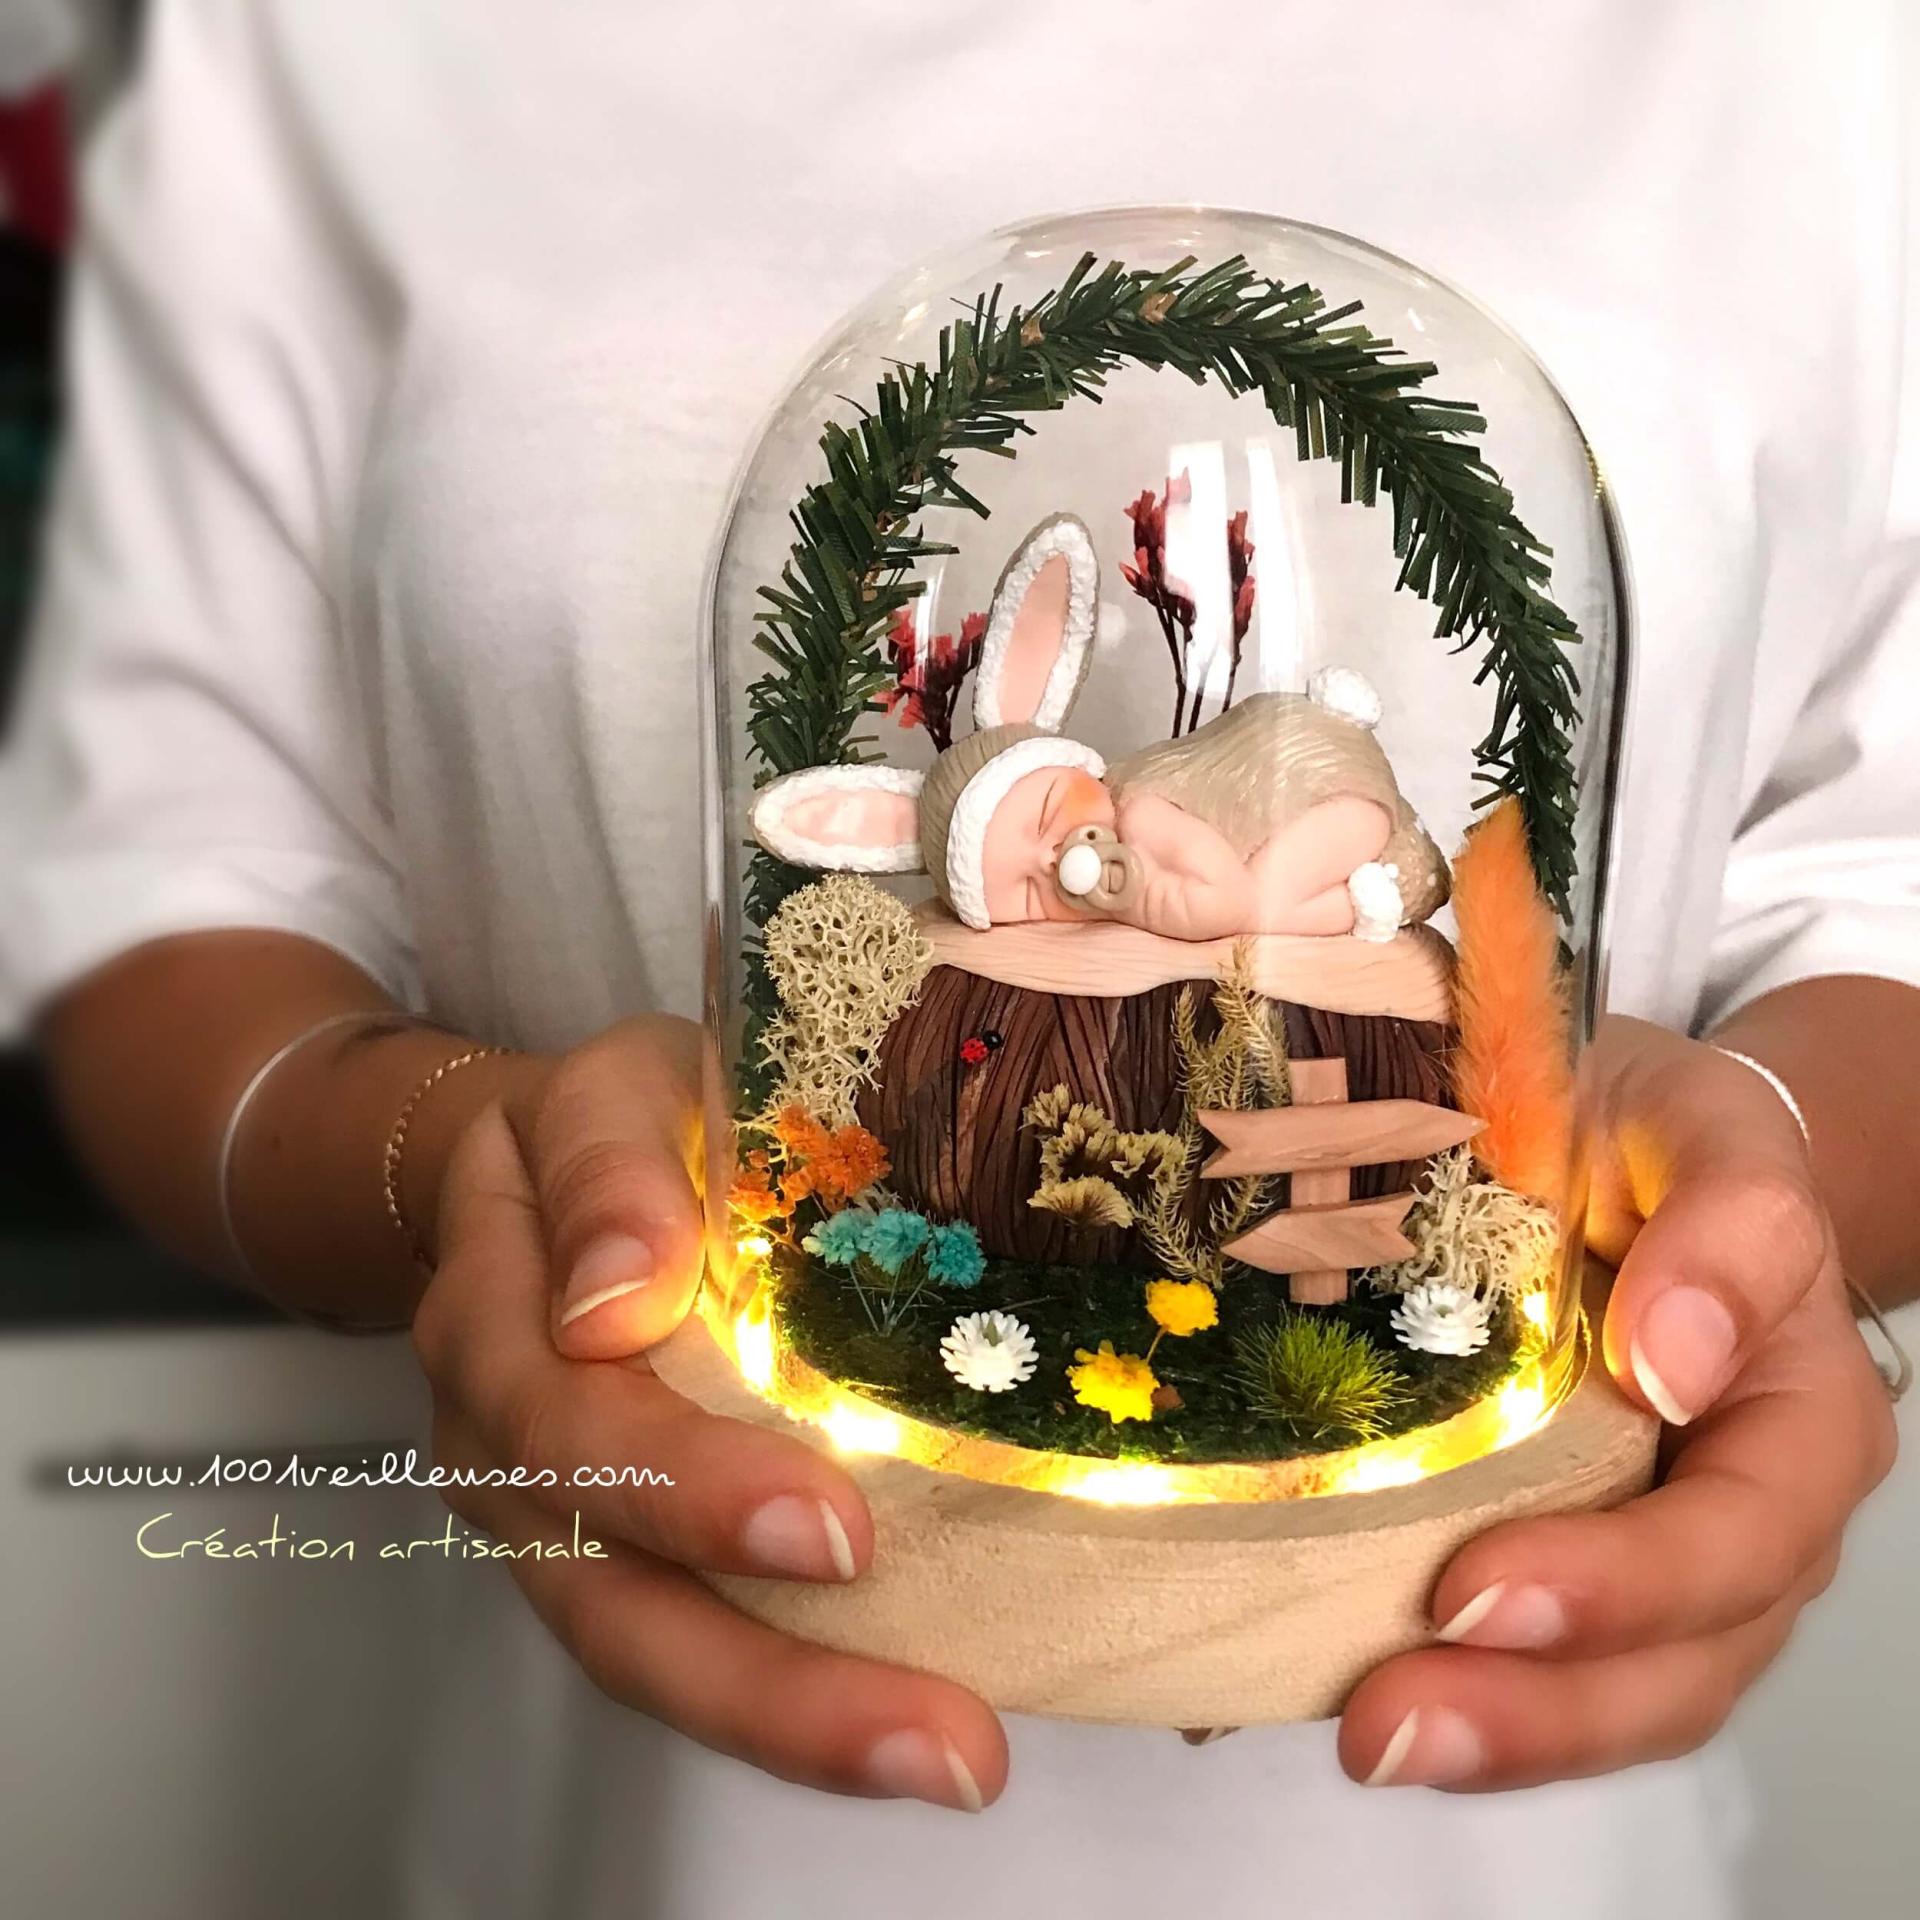 Personalized and handmade eternal bell-shaped night light, featuring an adorable baby dressed as a gray rabbit, presented in hands